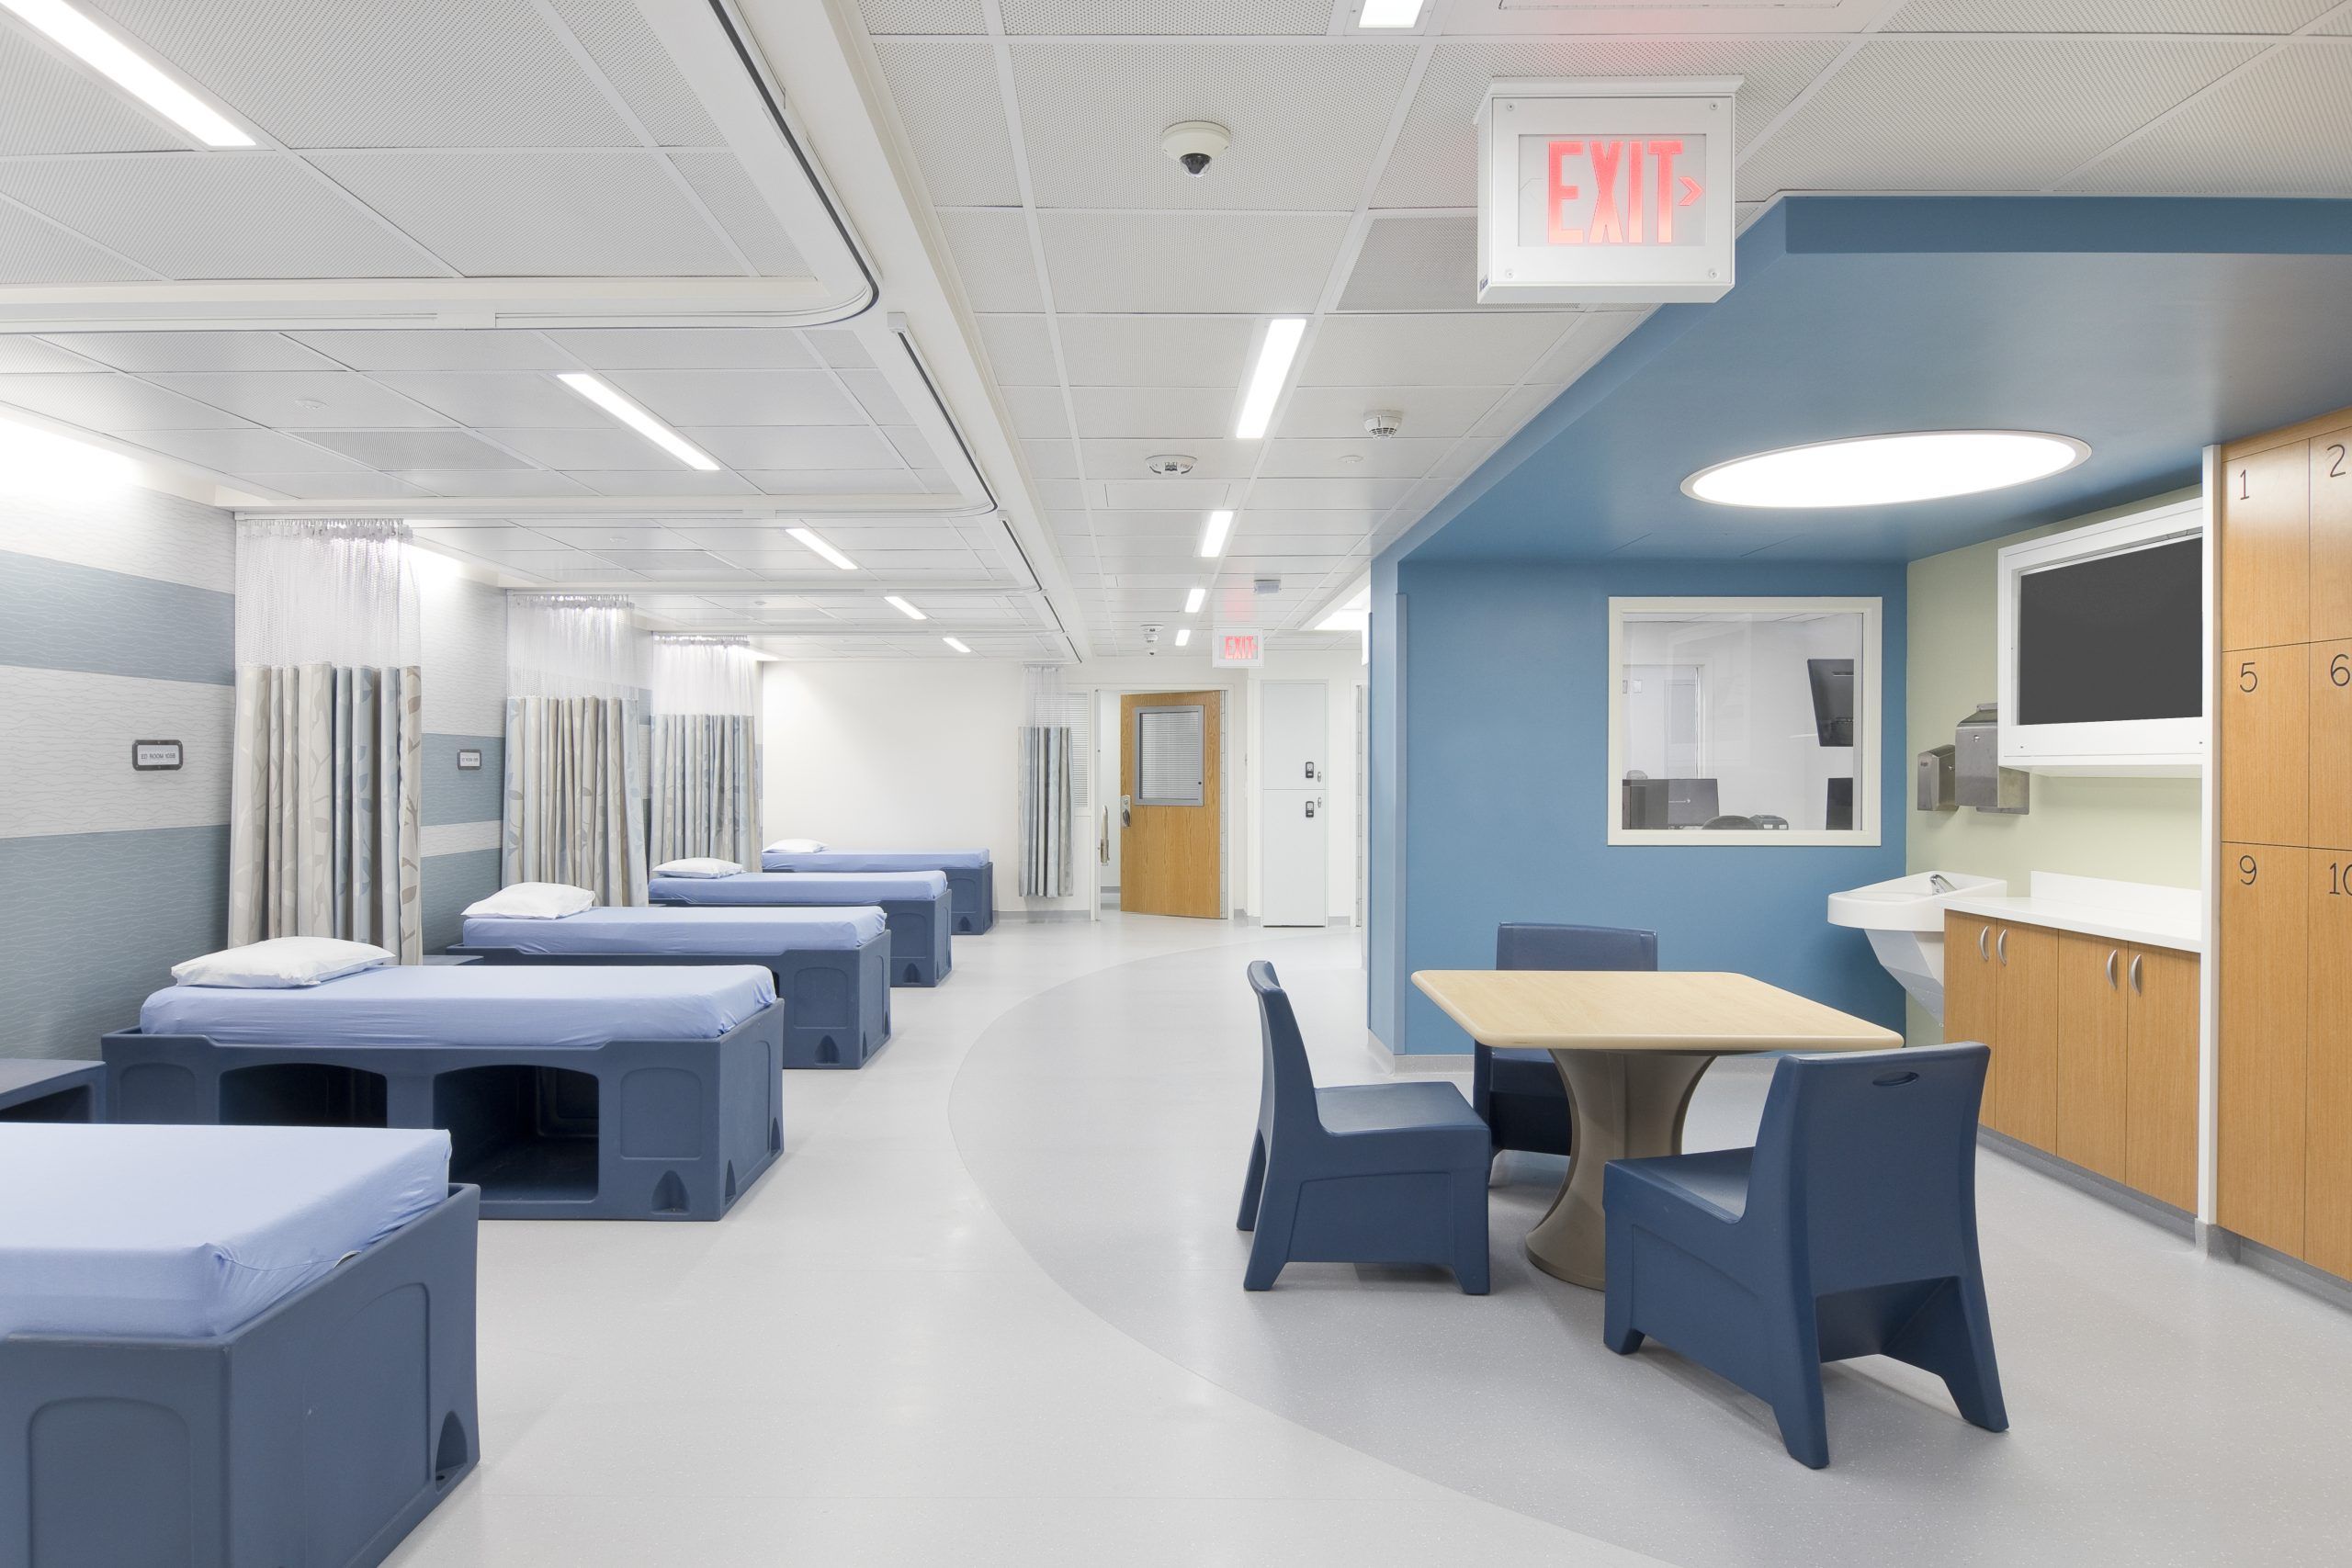 WISE BUILDS A WELCOMING MILIEU FOR BEVERLY HOSPITAL’S NEWLY RENOVATED BEHAVIORAL HEALTH ED POD